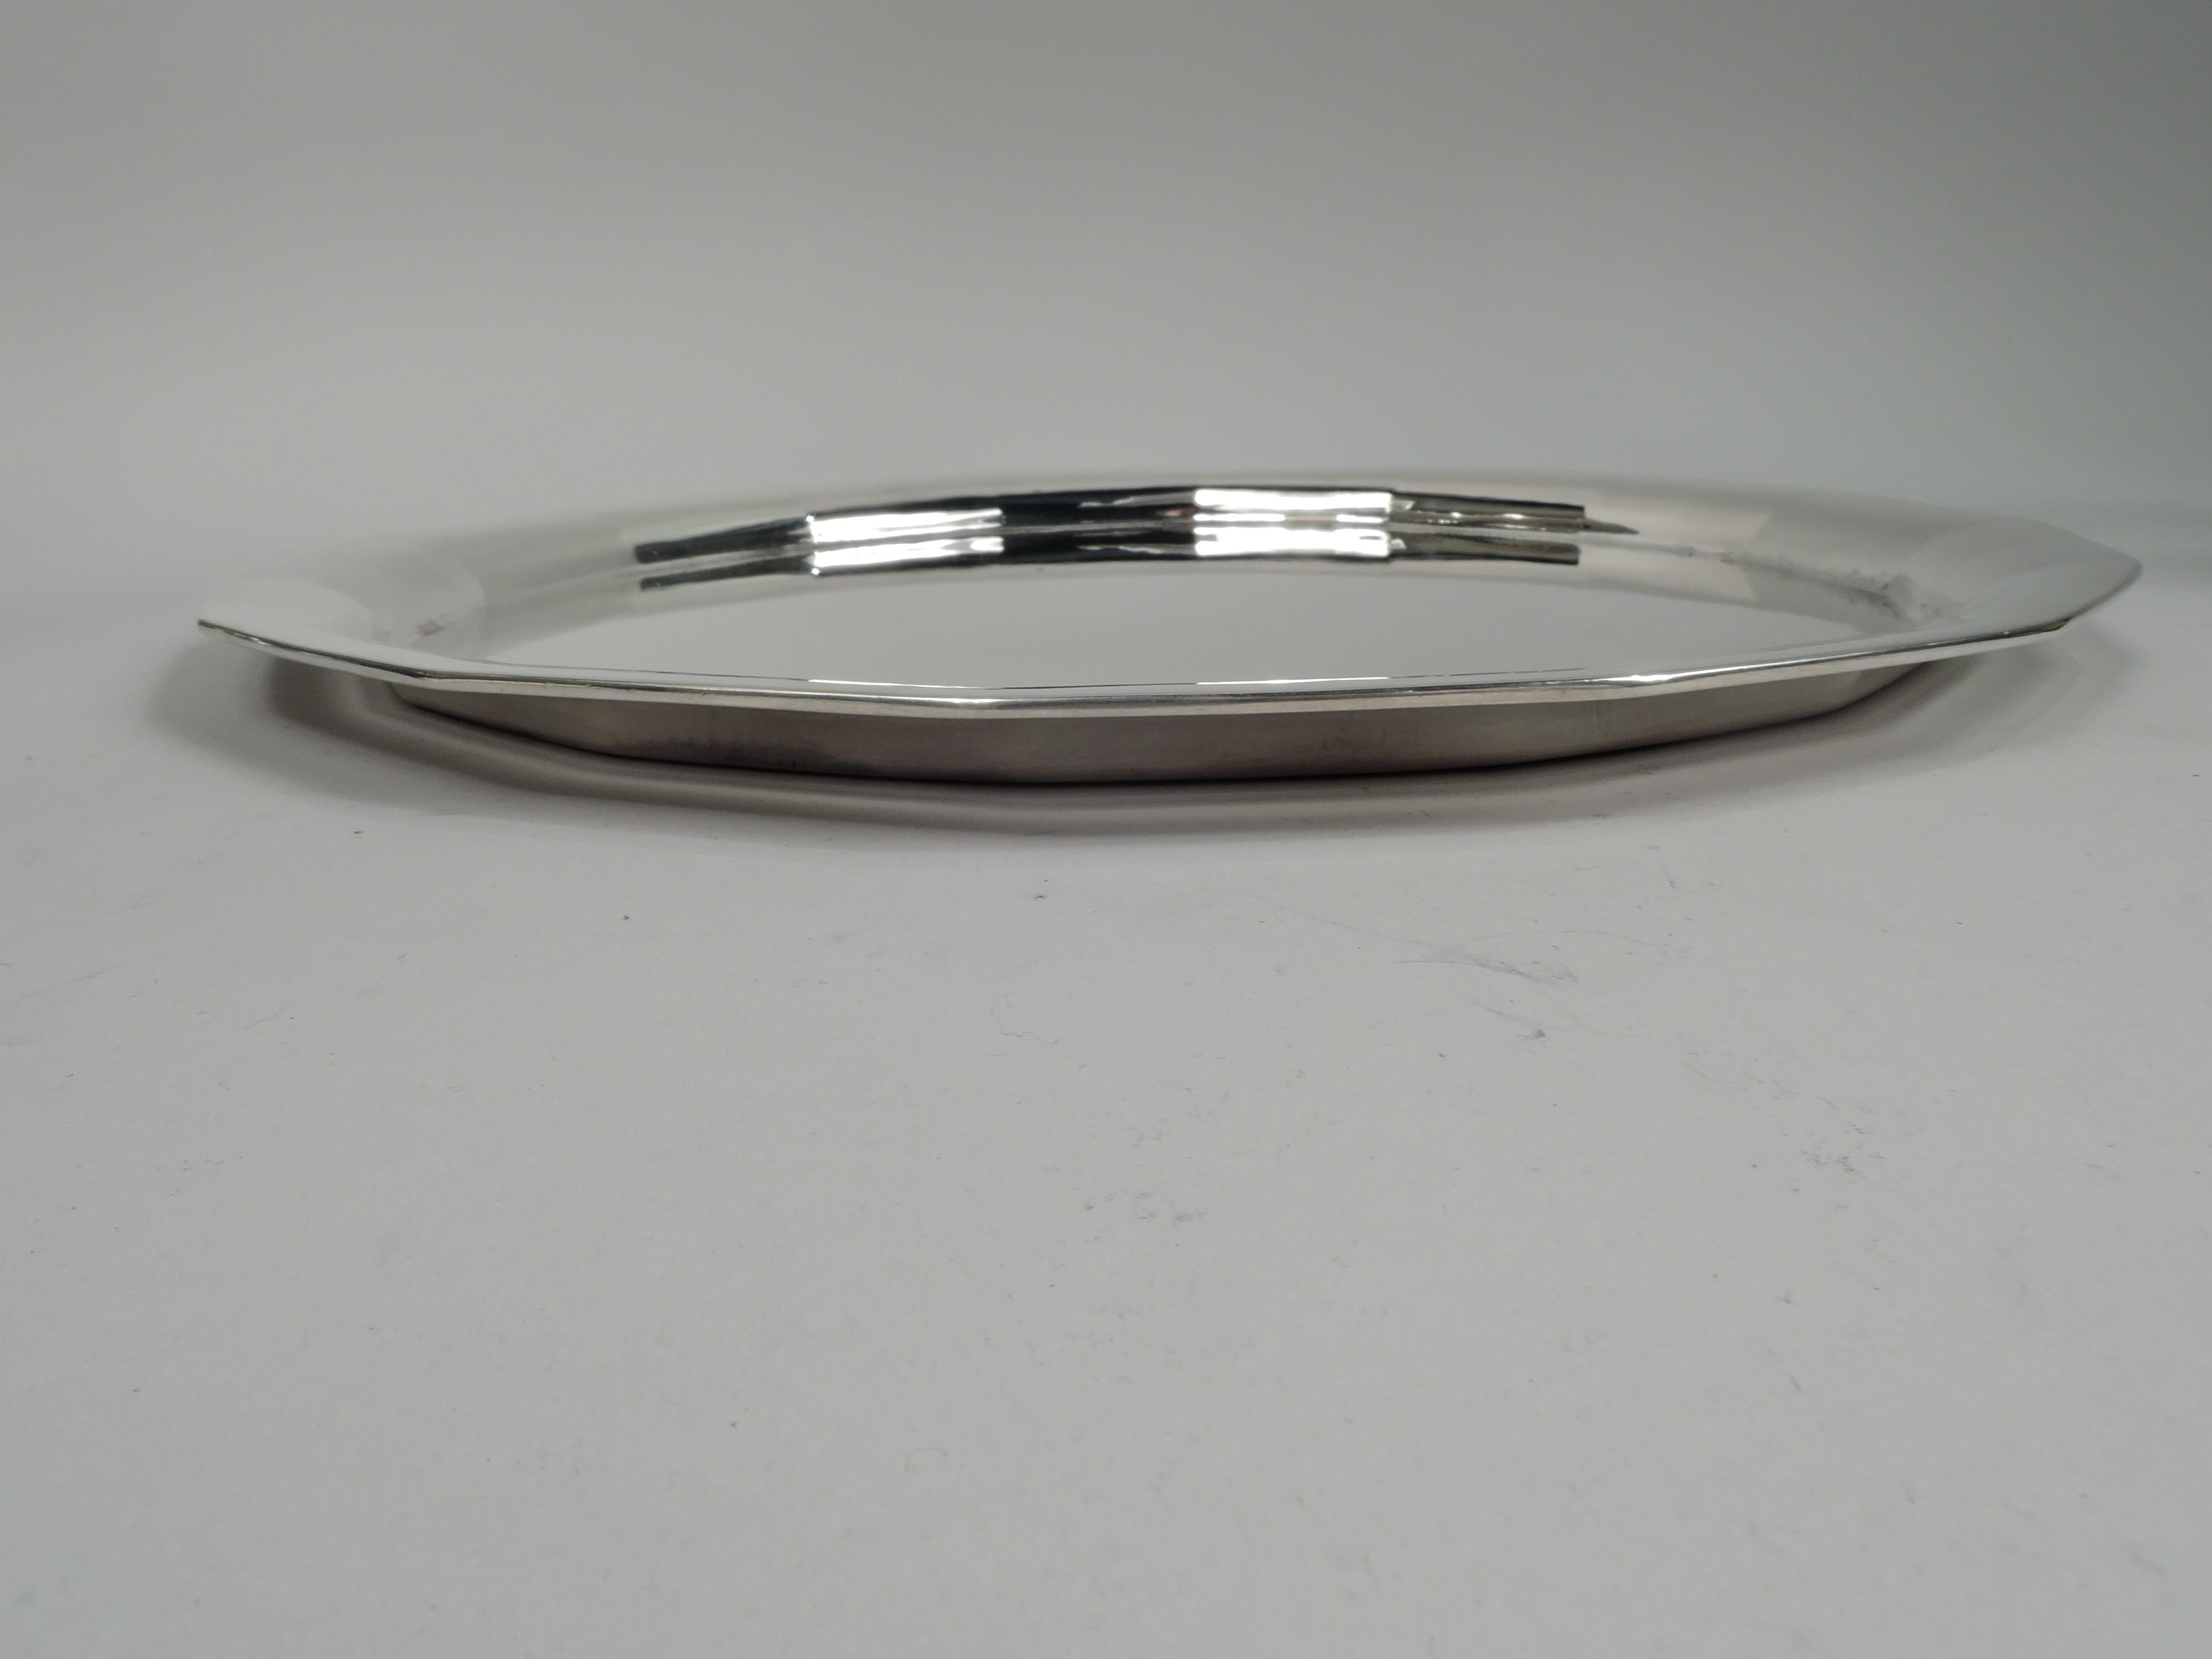 Art Deco sterling silver tray. Made by Tiffany & Co. in New York, ca 1911. Round with soft faceting. A nice piece in the emerging geometric style. Fully marked including maker’s stamp, pattern no. 18072 (first produced in 1911), and director’s